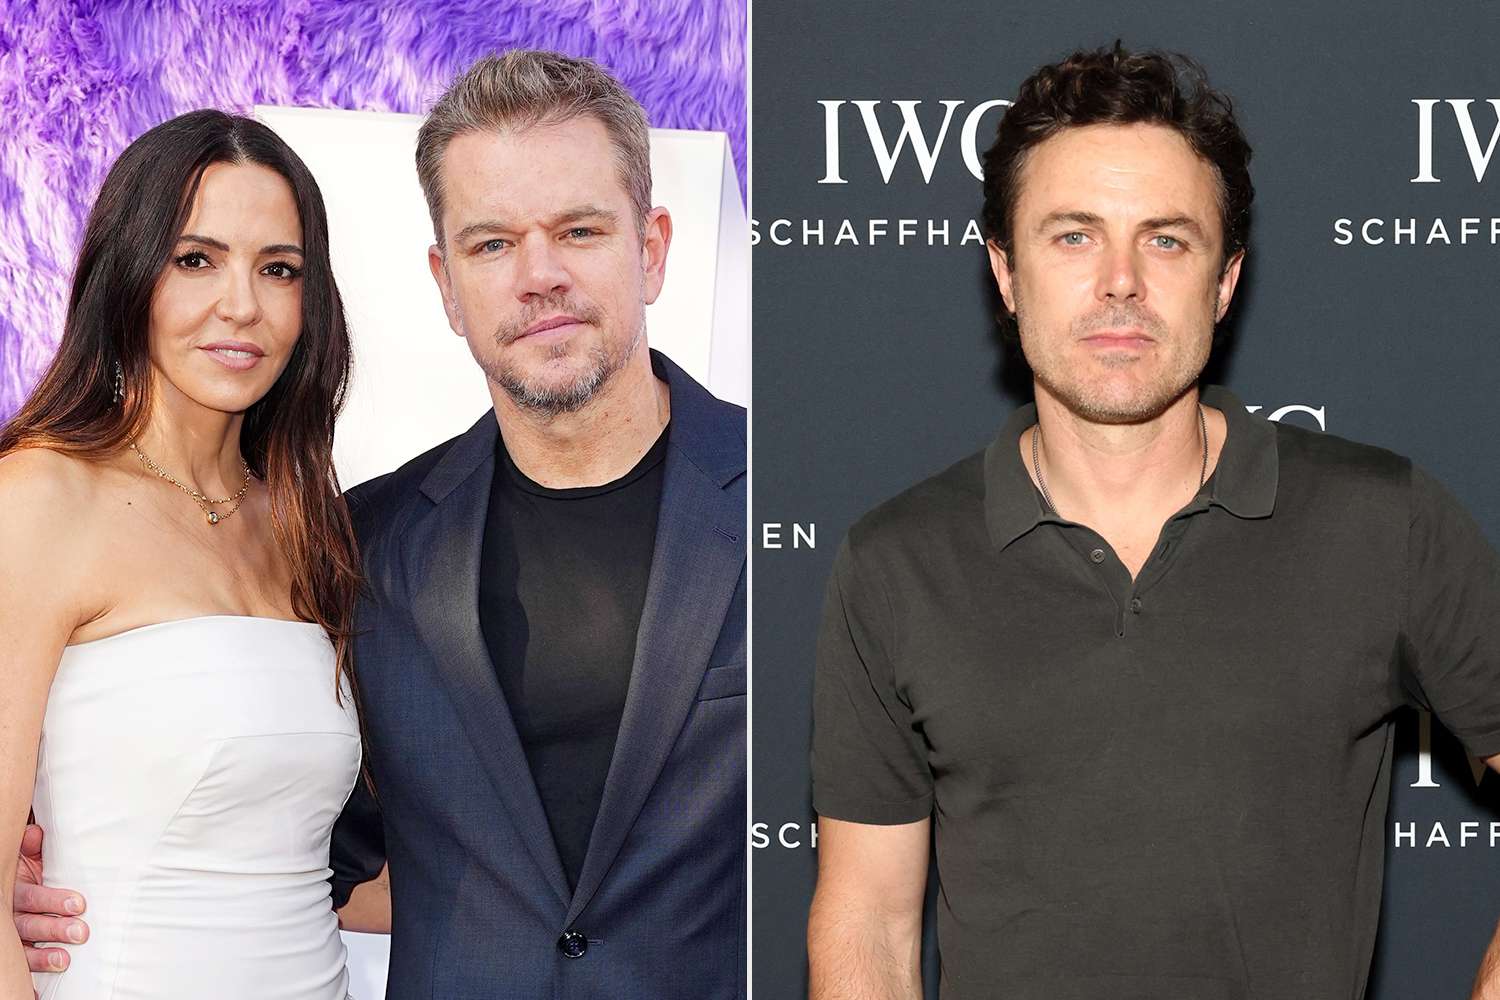 Matt Damon Was Convinced to Join The Instigators After Wife Luciana ‘Worked On’ Him, Costar Casey Affleck Says